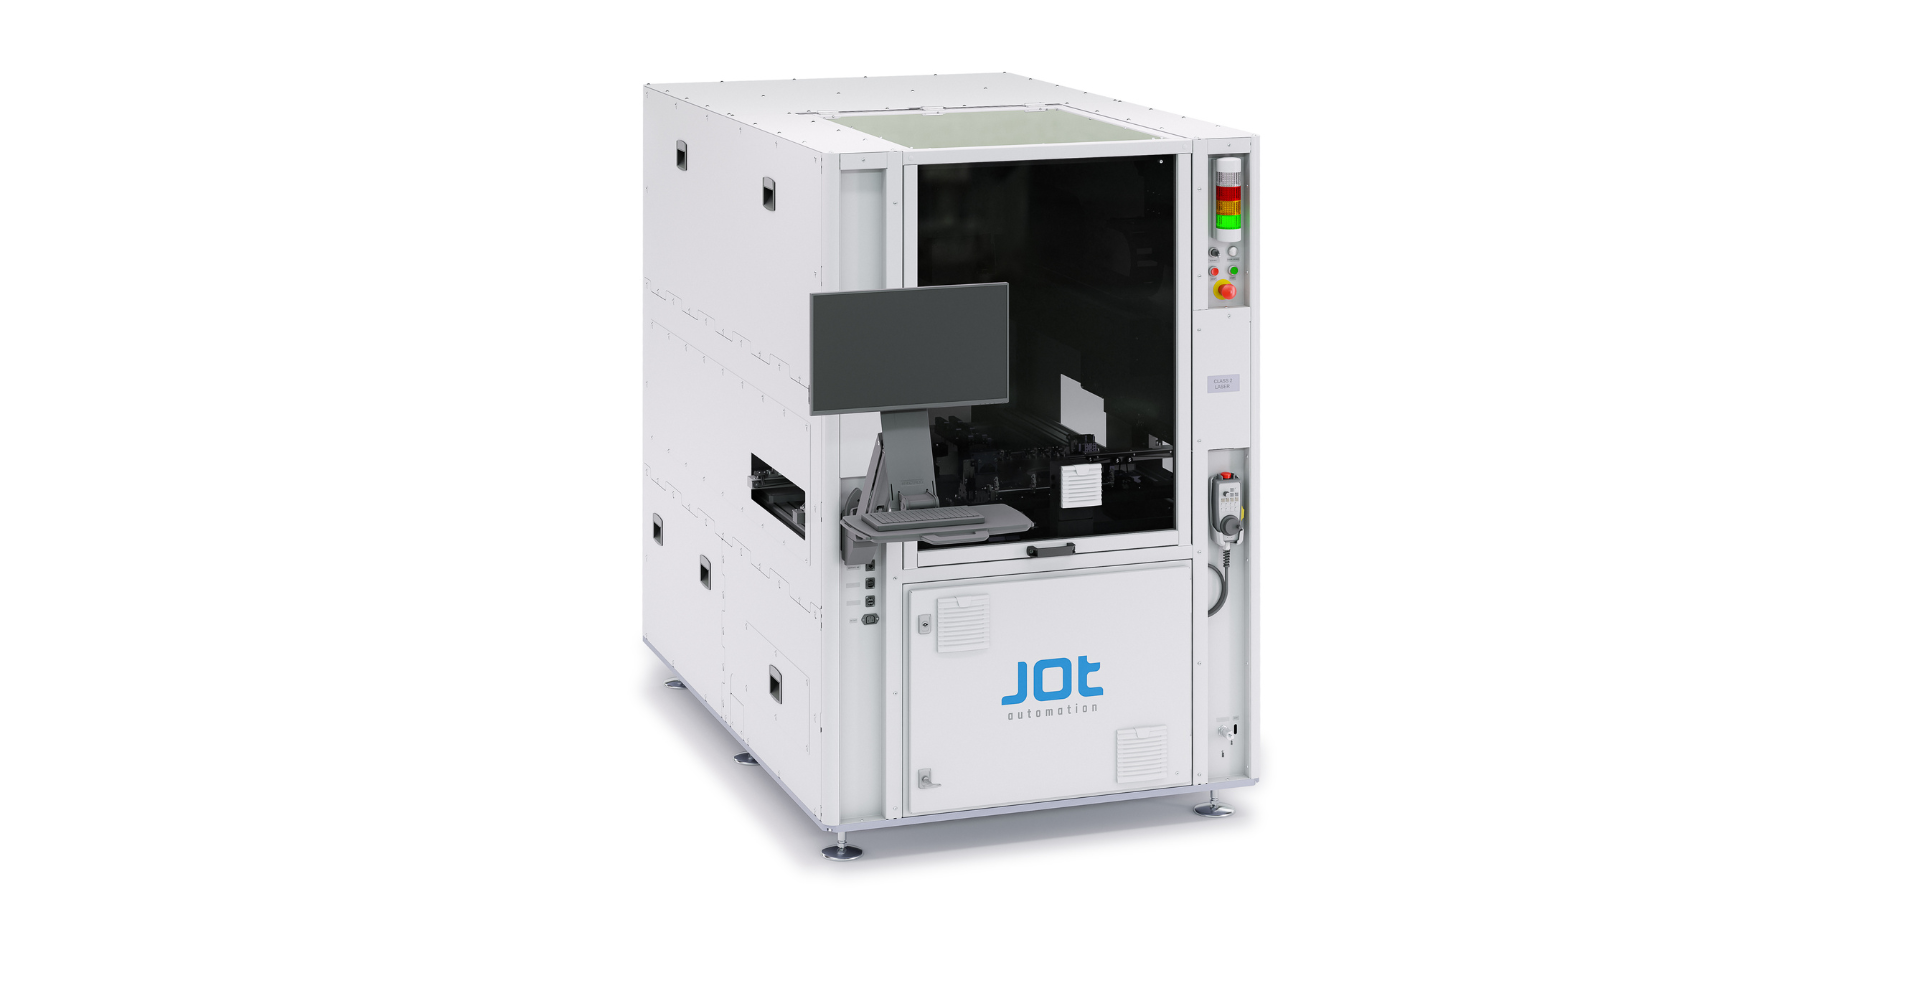 JOT Automation introduces all-new Router for automated depaneling of PCBs and panels